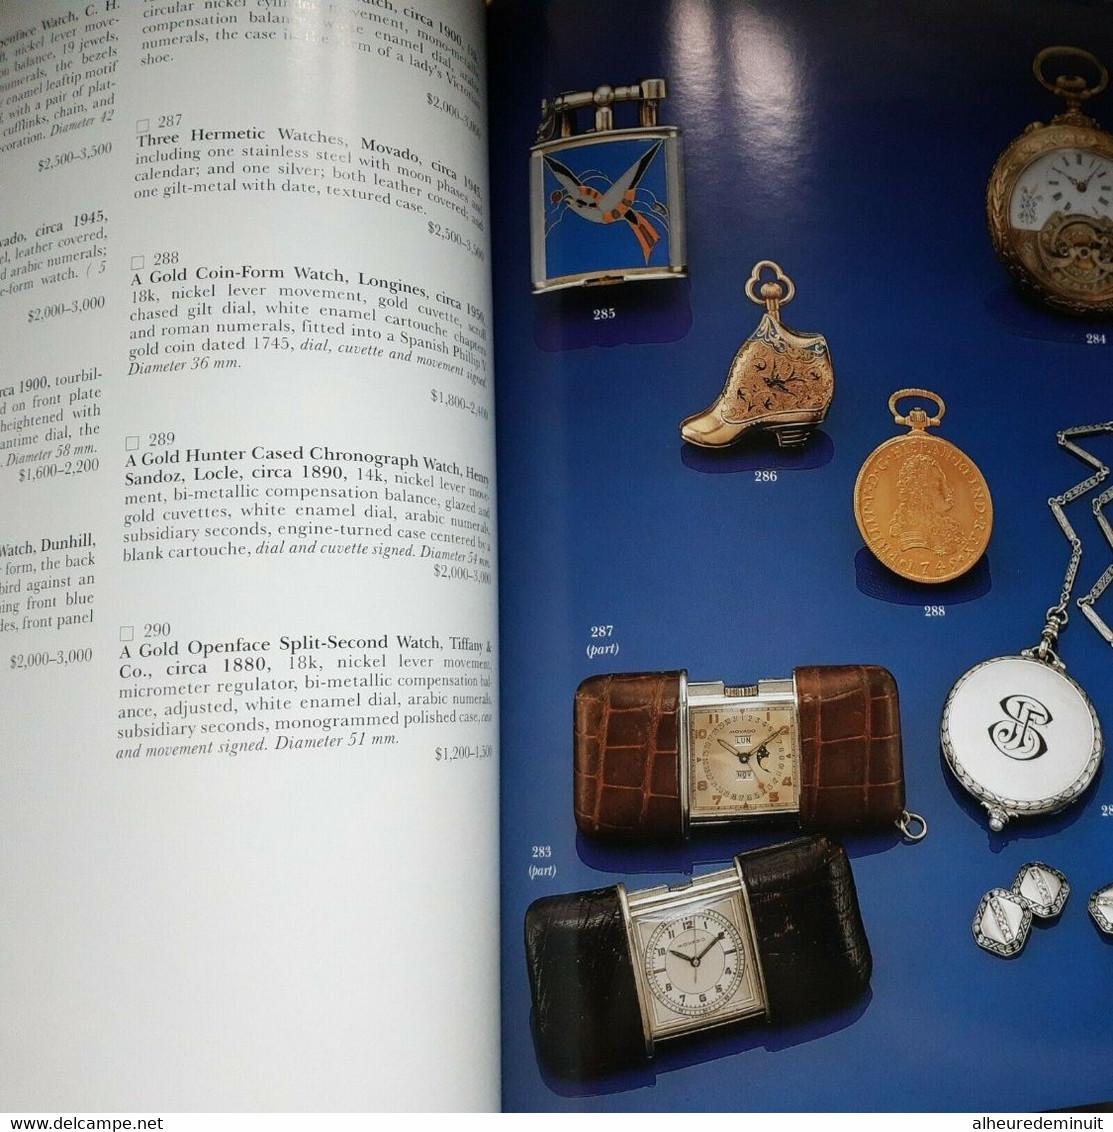 Catalogue SOTHEBY'S"IMPORTANT WATCHES WRISTWATCHES CLOCKS MARINE CHRONOMETERS NAVIGATIONAL INSTRUMENTS"Montres